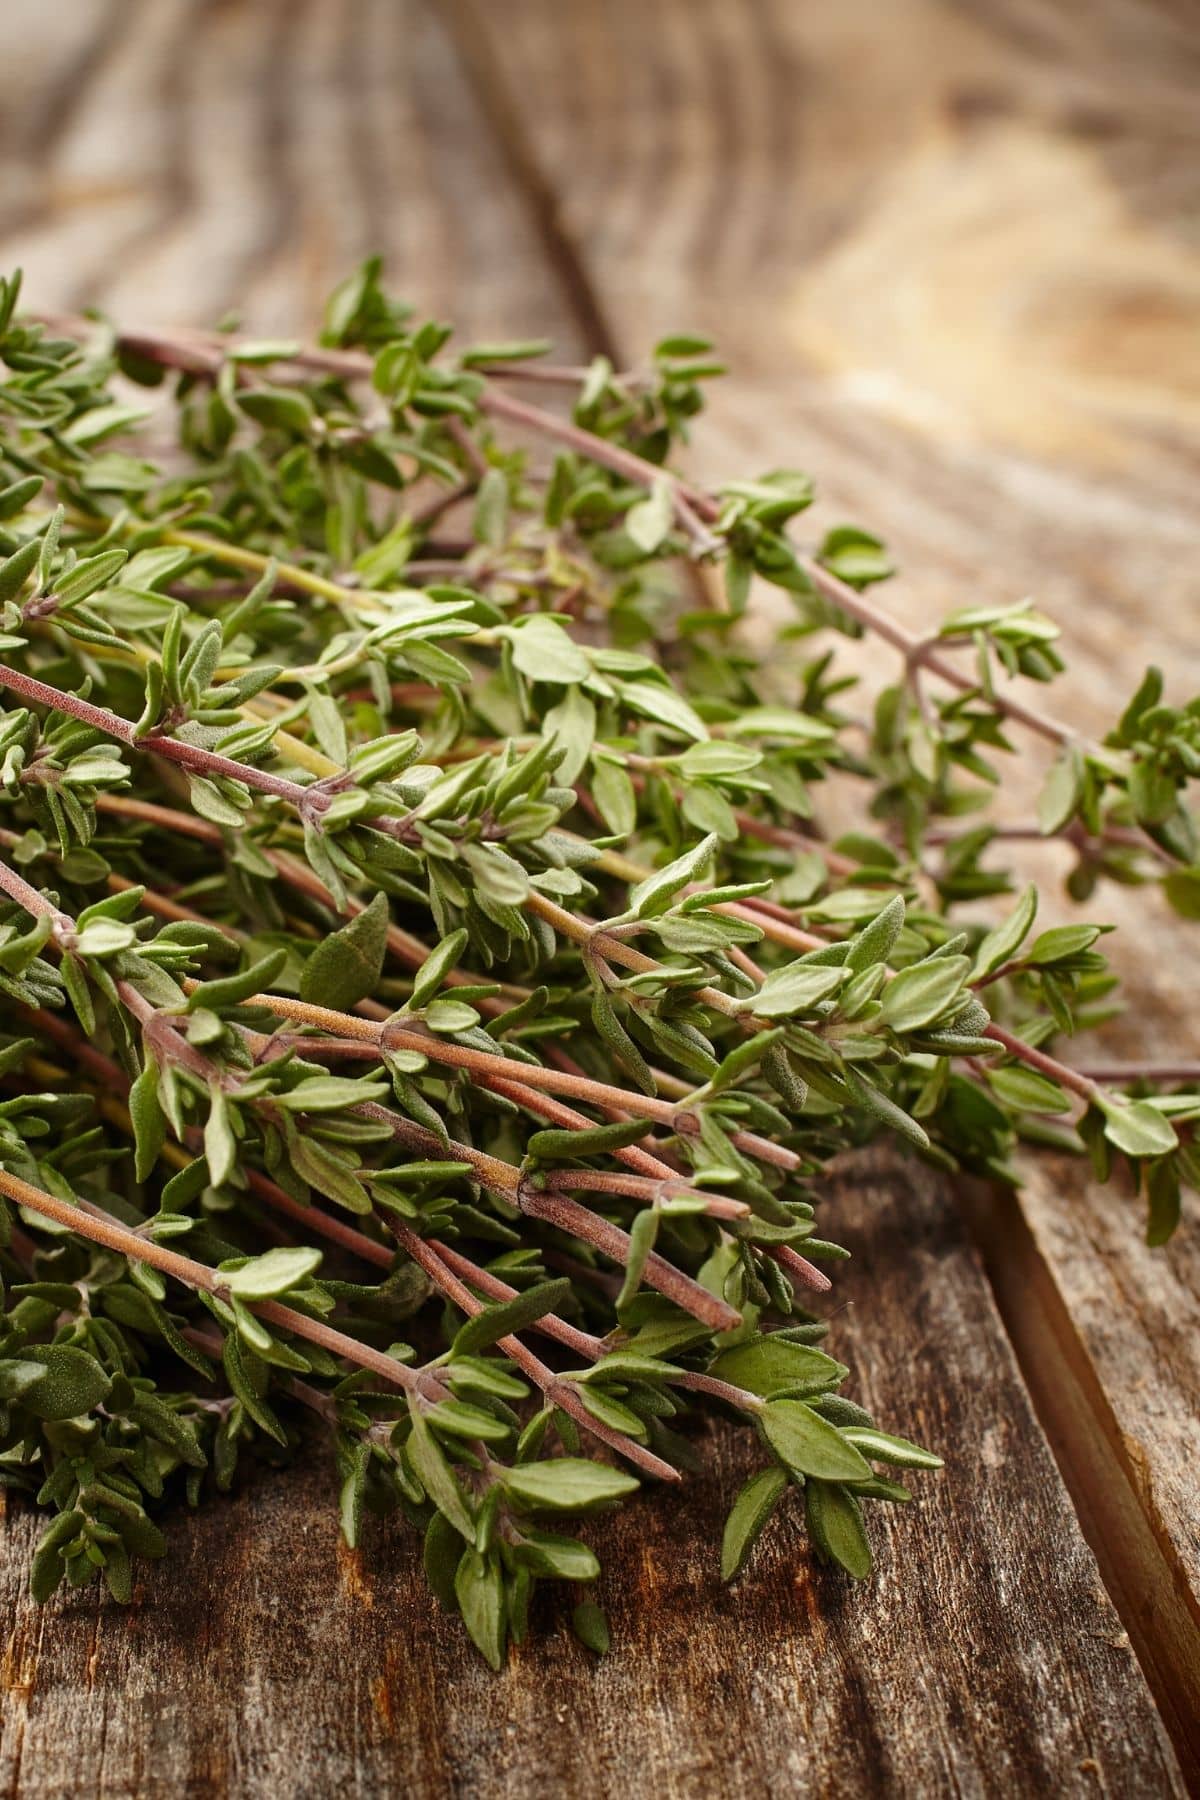 Fresh thyme sprigs on a wooden surface.